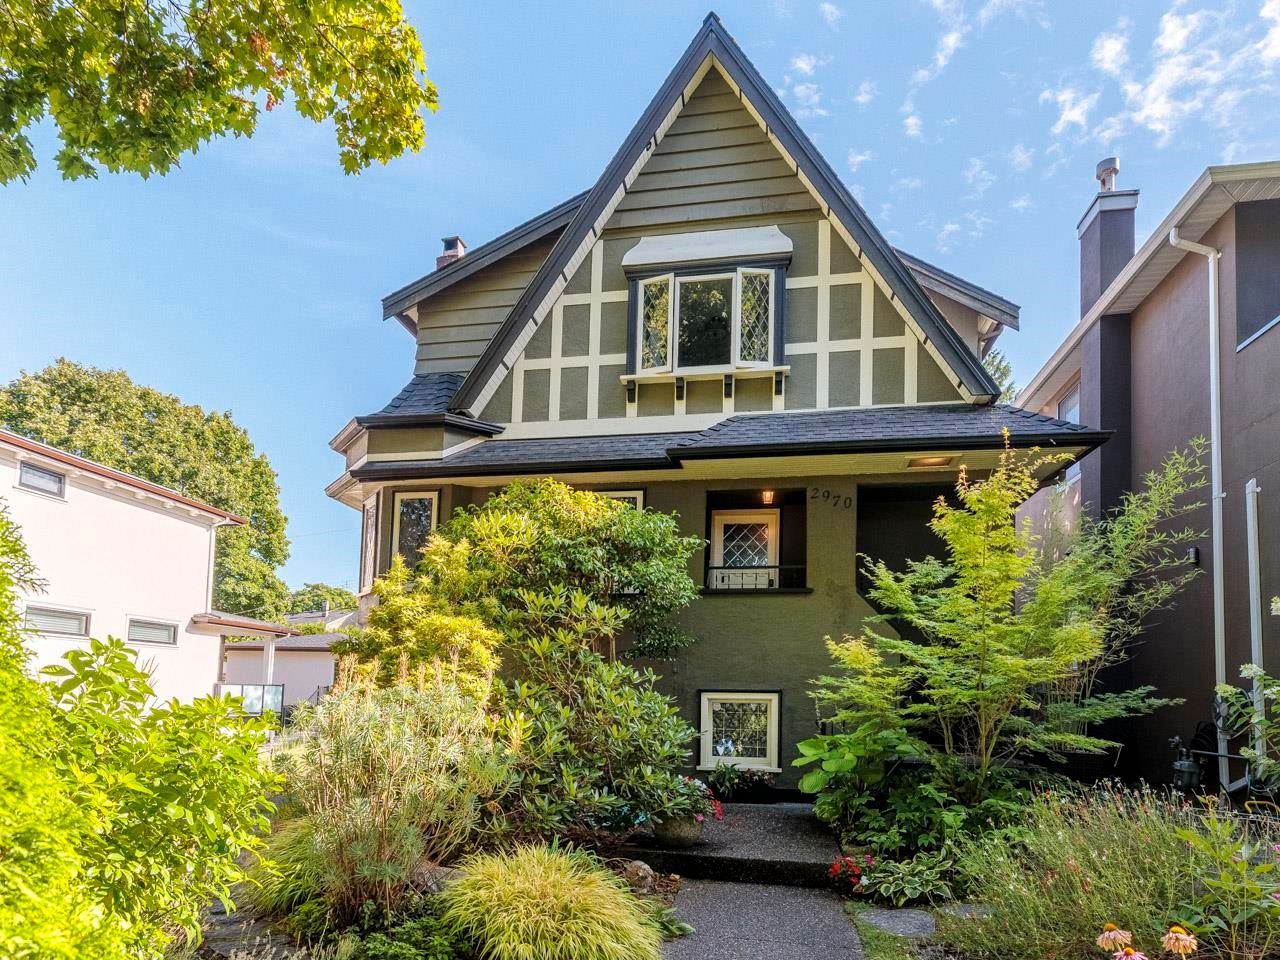 Main Photo: 2970 W 28TH AVENUE in Vancouver: MacKenzie Heights House for sale (Vancouver West)  : MLS®# R2615274